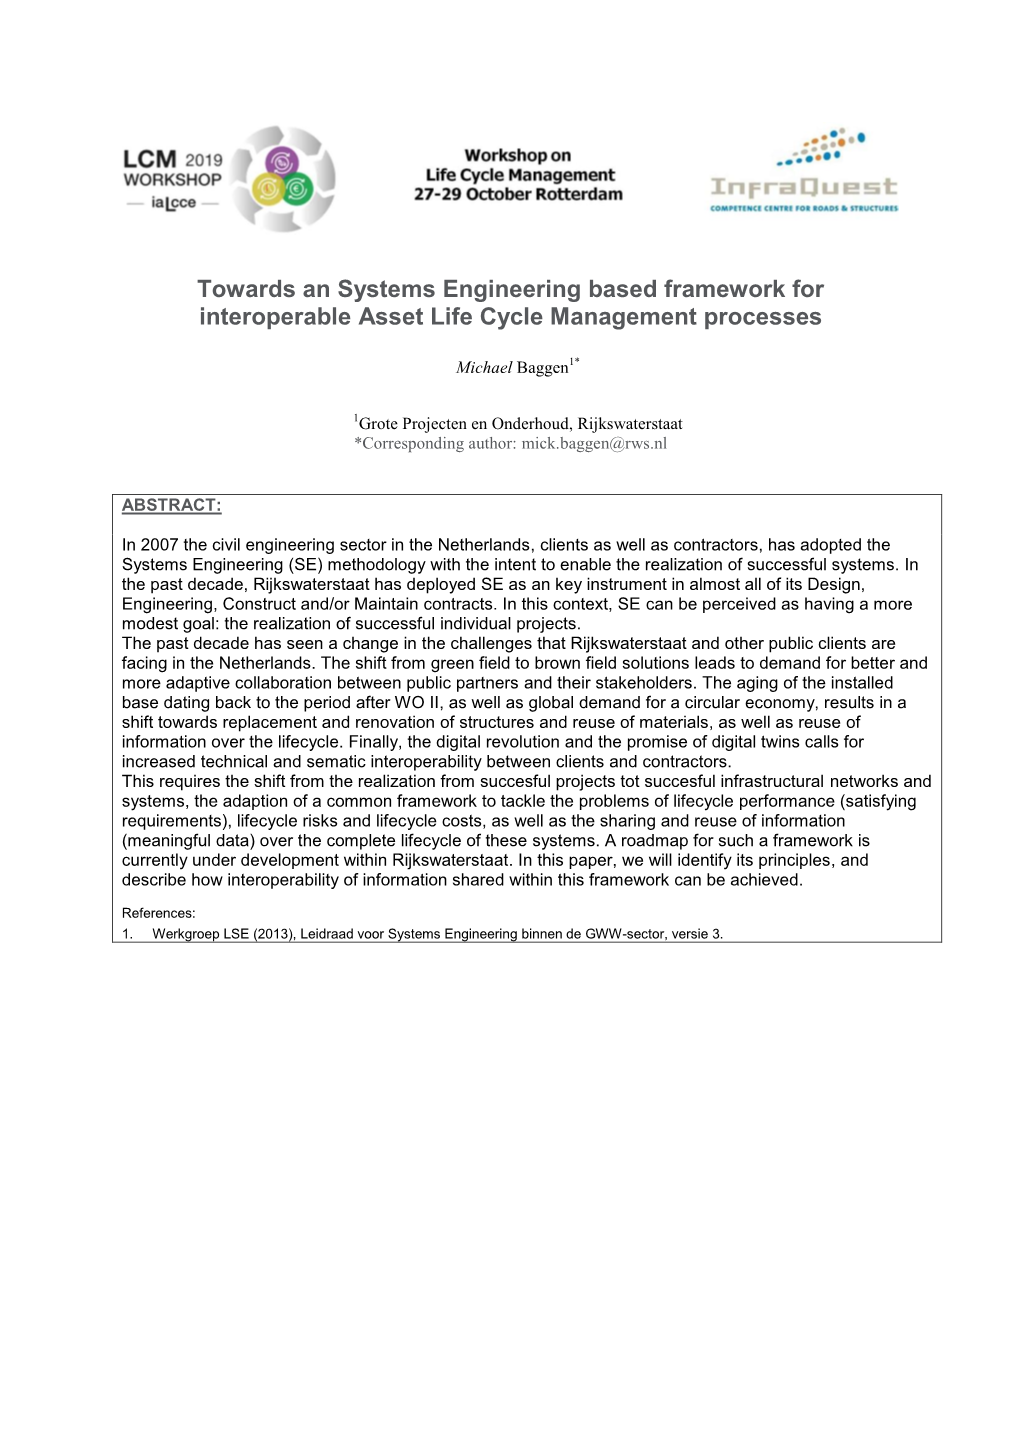 Towards an Systems Engineering Based Framework for Interoperable Asset Life Cycle Management Processes